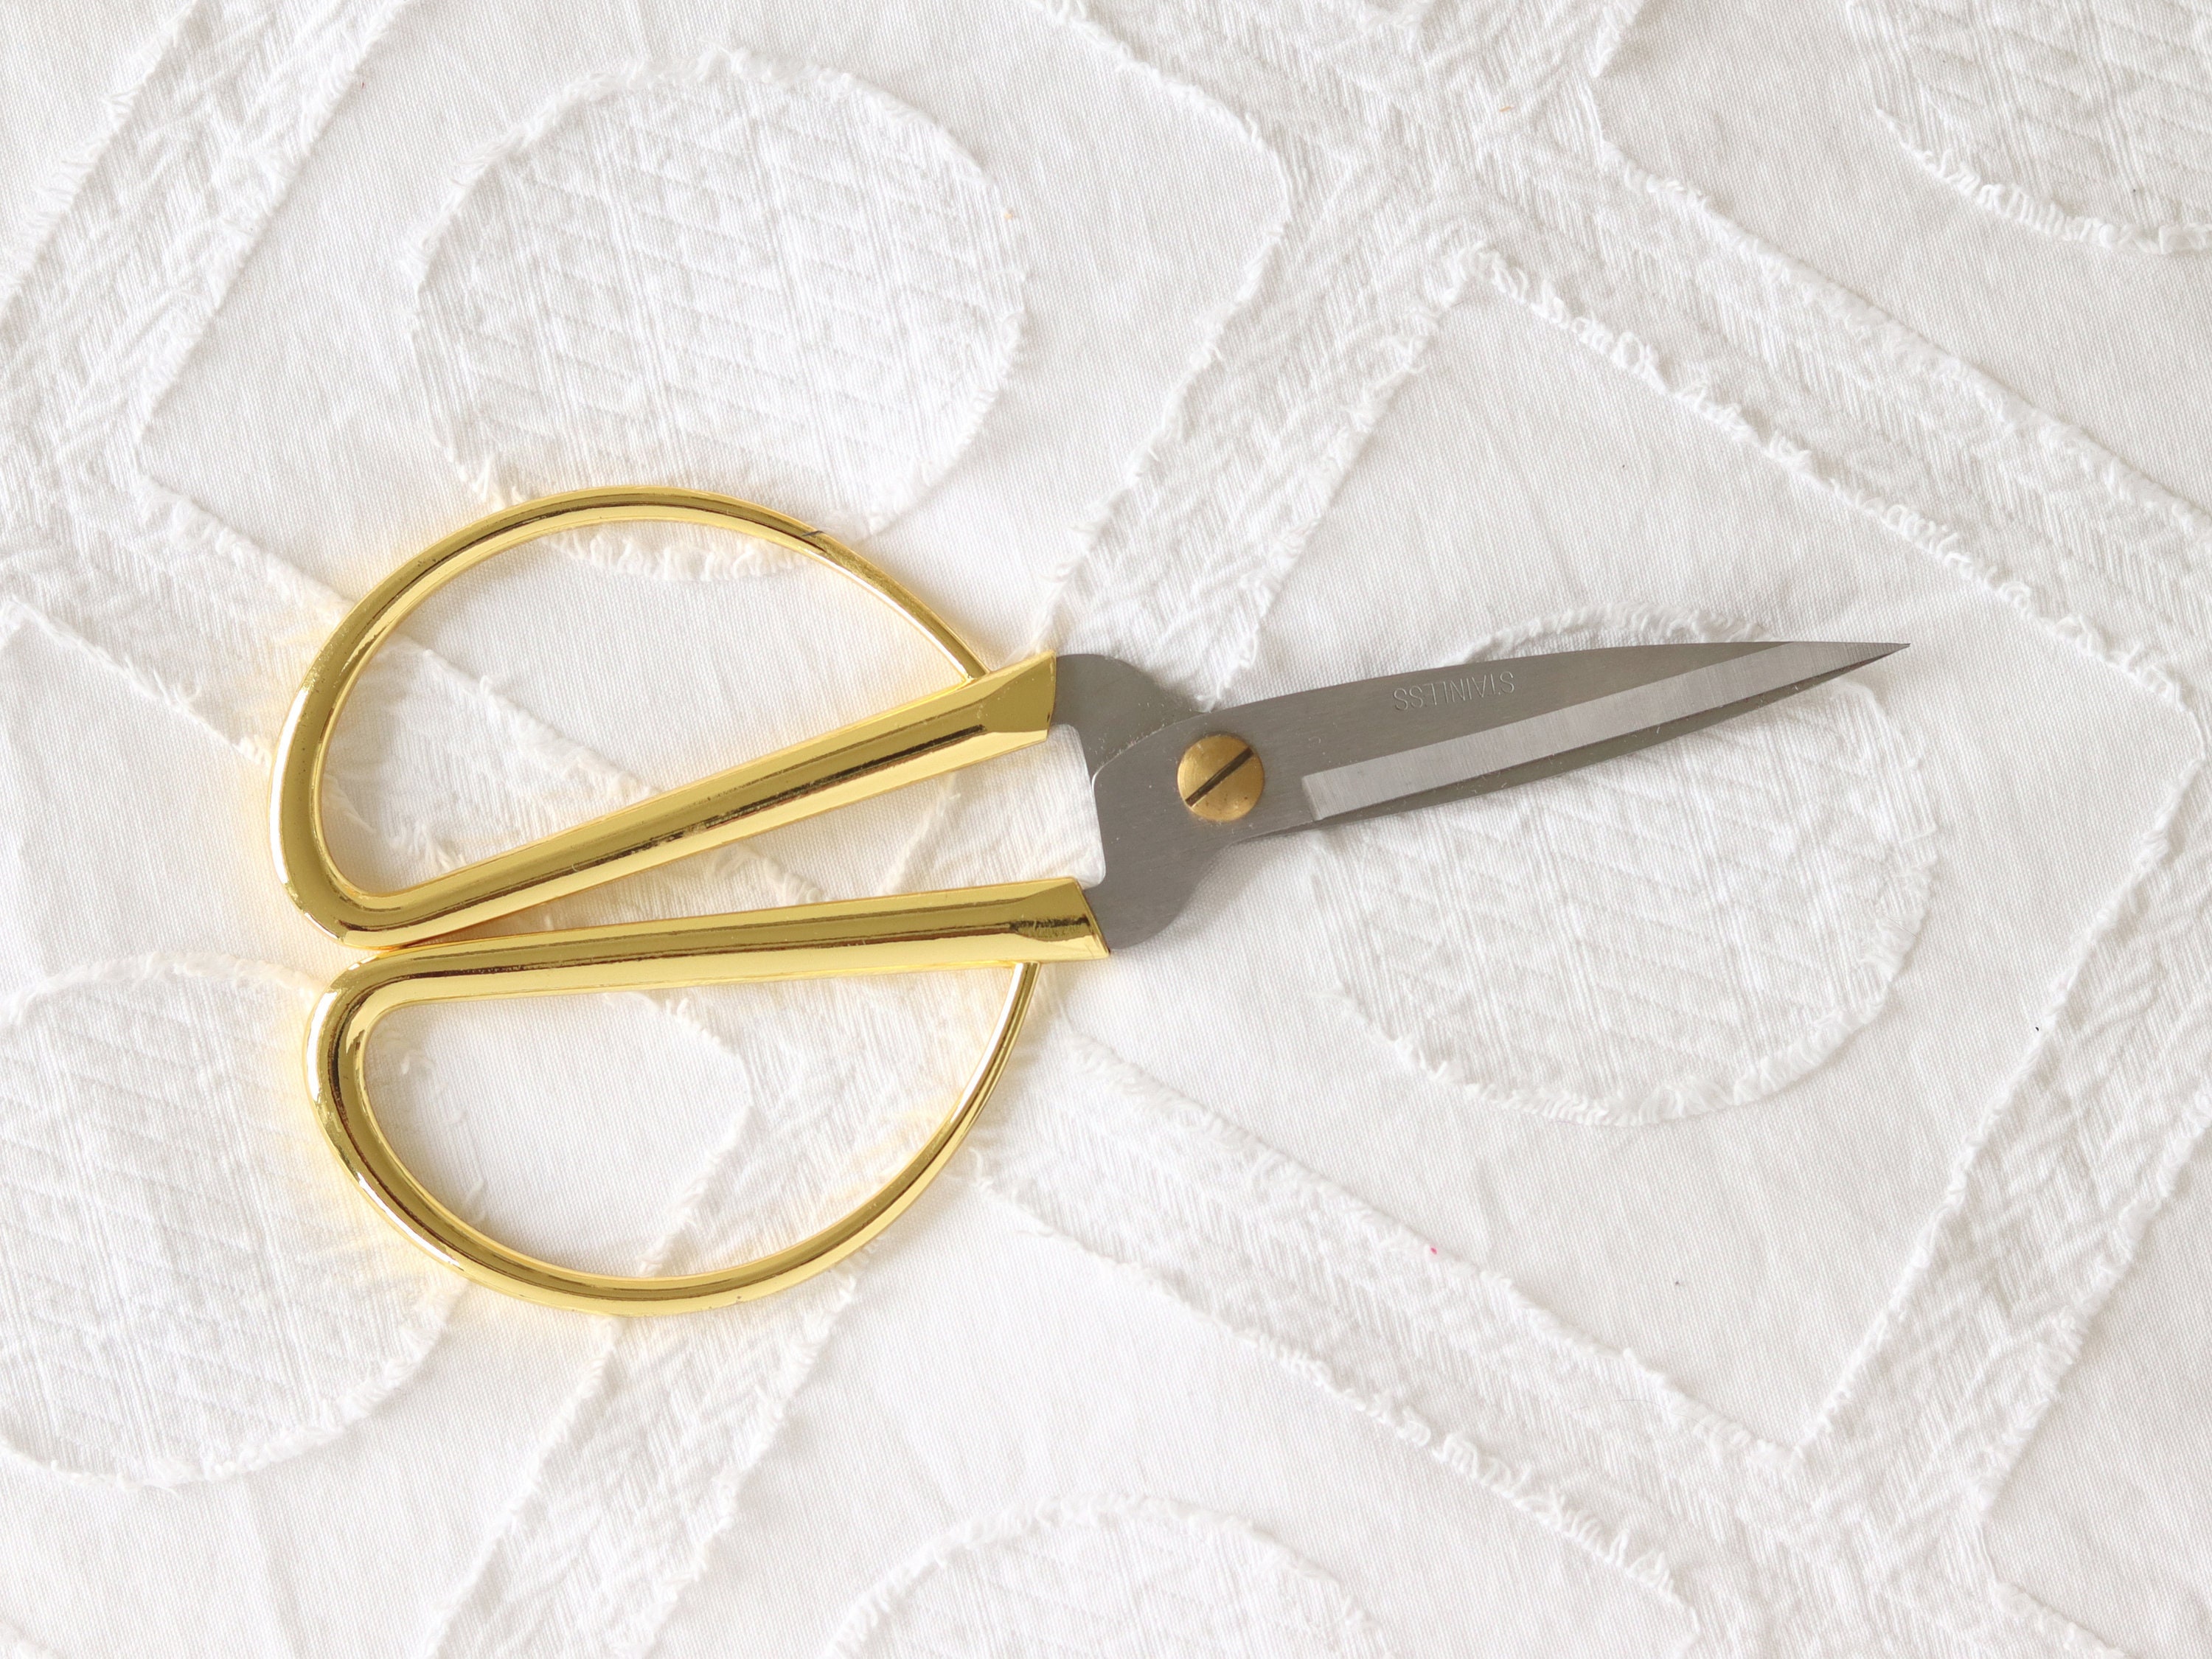 3.5 Multi Purpose Heart Shape Small Embroidery Fancy Scissors Gold Plated